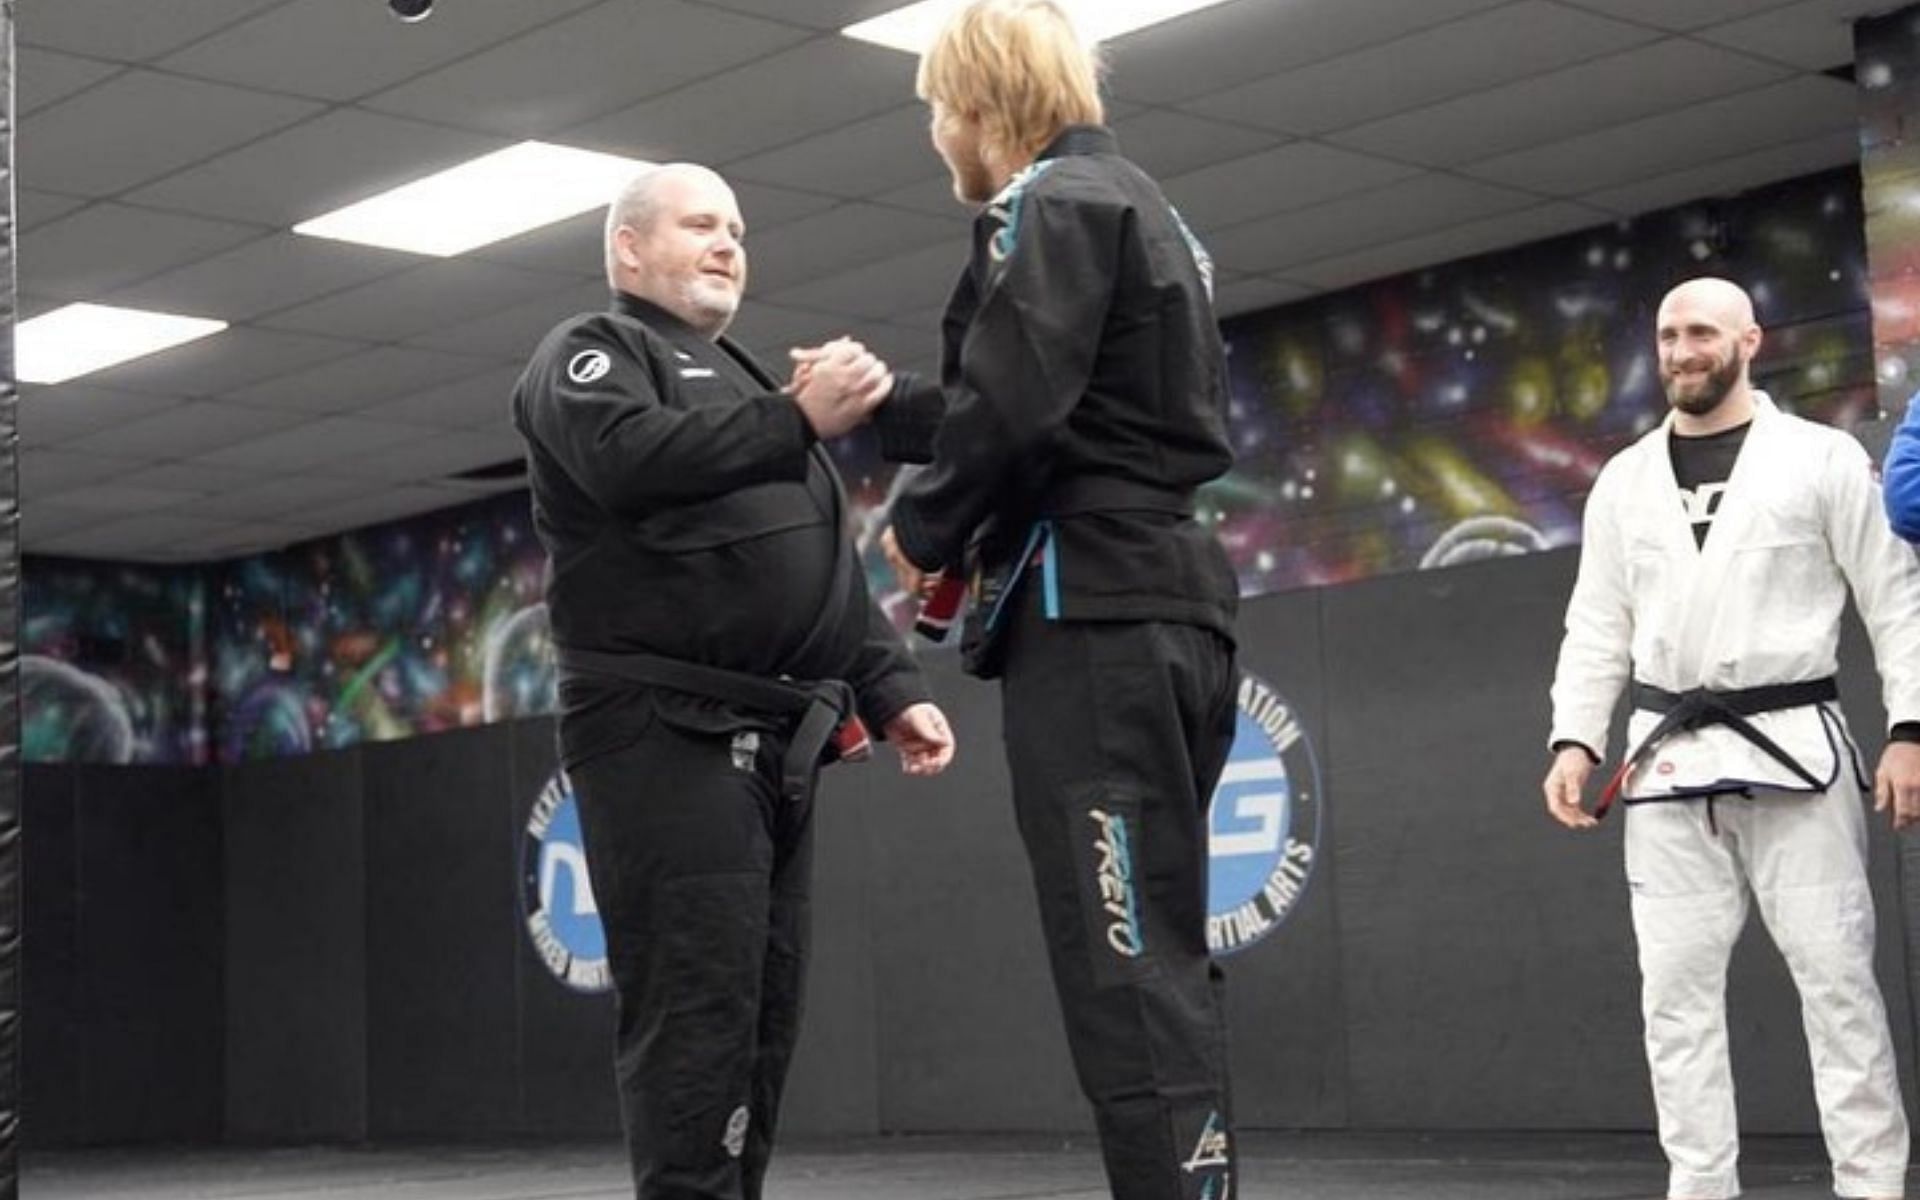 Paddy Pimblett receiving his first degree black from his coach at Next Generation UK. Credits: @paddythebaddyufc on Instagram